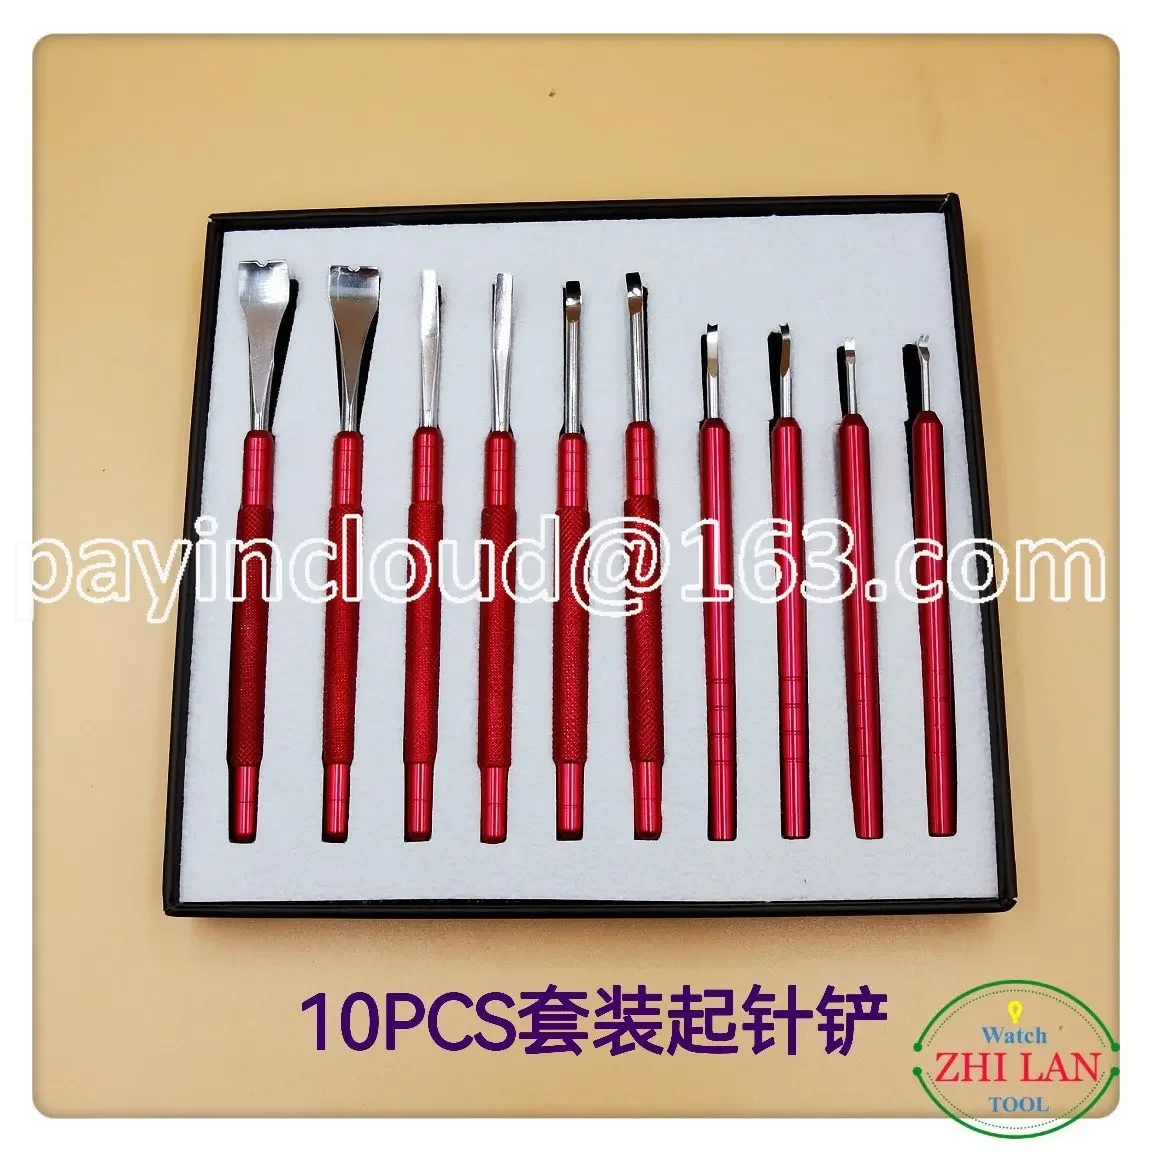 

Watch Repair Tool/10 Pieces Set Needle Shovel/Red Aluminum Handle Set Pry Needle/Needle Shovel/Pry Needle/Needle Pliers